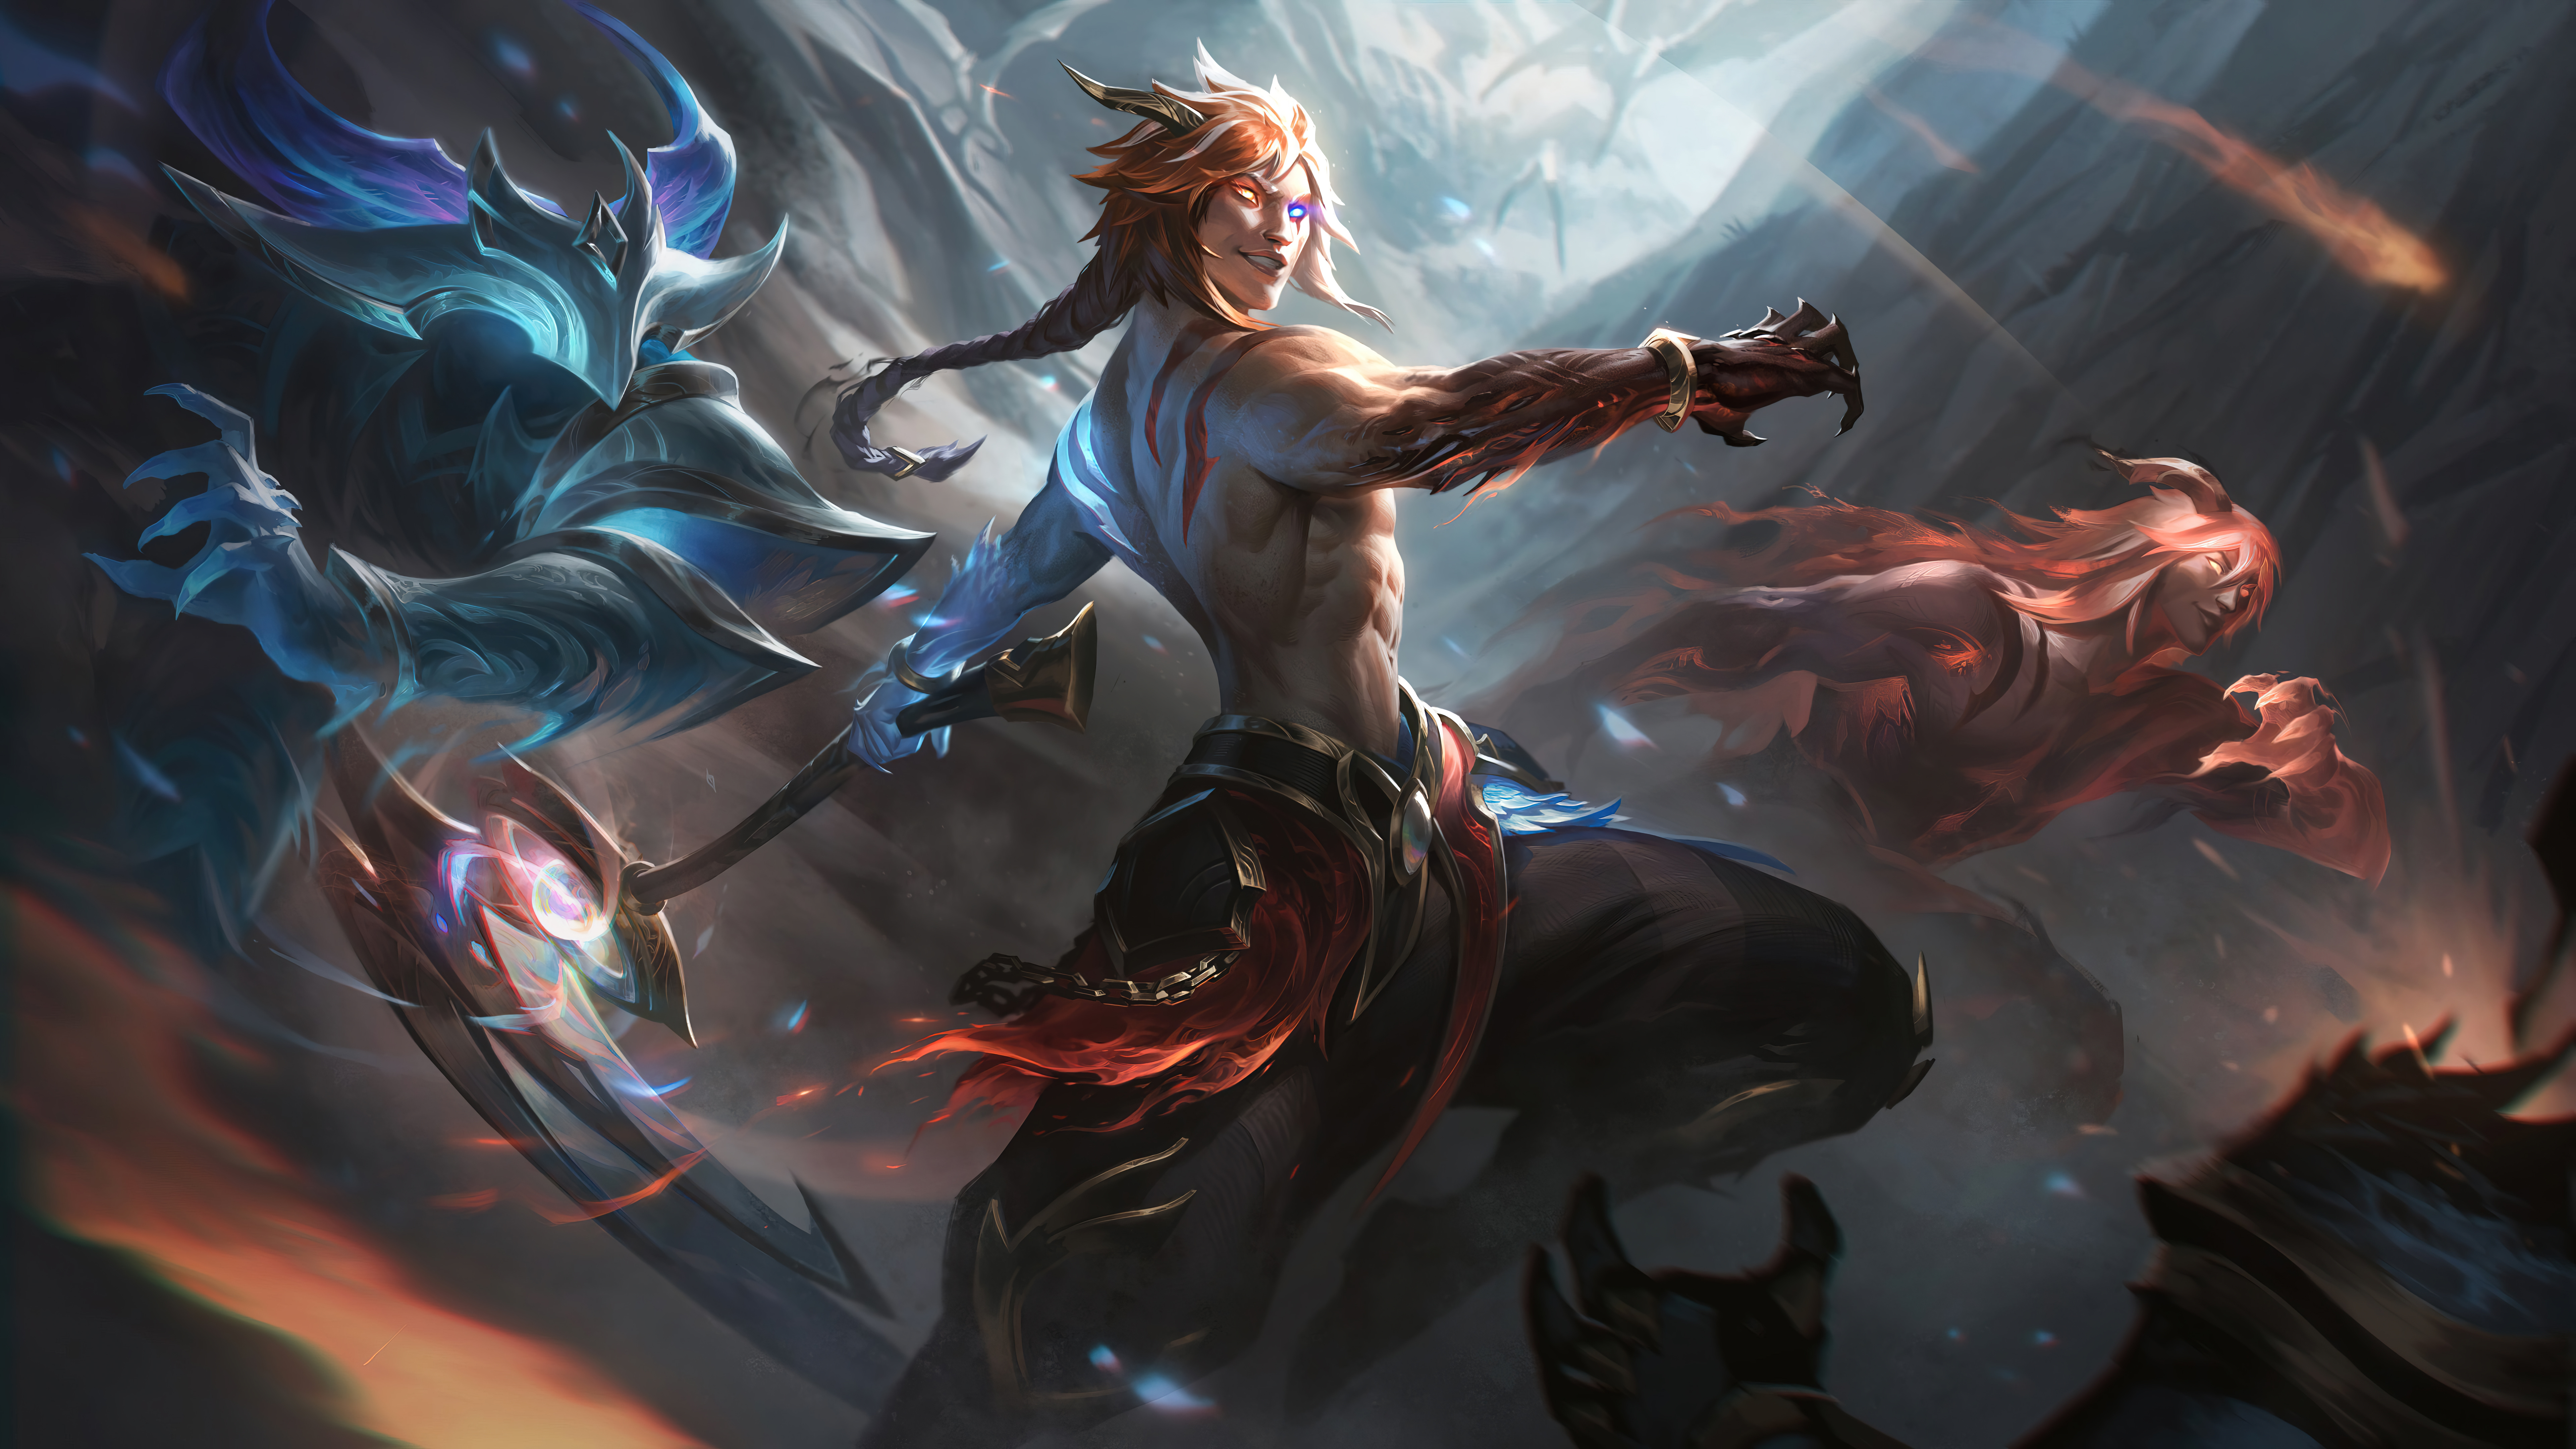 Night Dawn Nightbringer Dawnbringer Nightbringer Dawnbringer Kayn Kayn League Of Legends League Of L 7680x4320